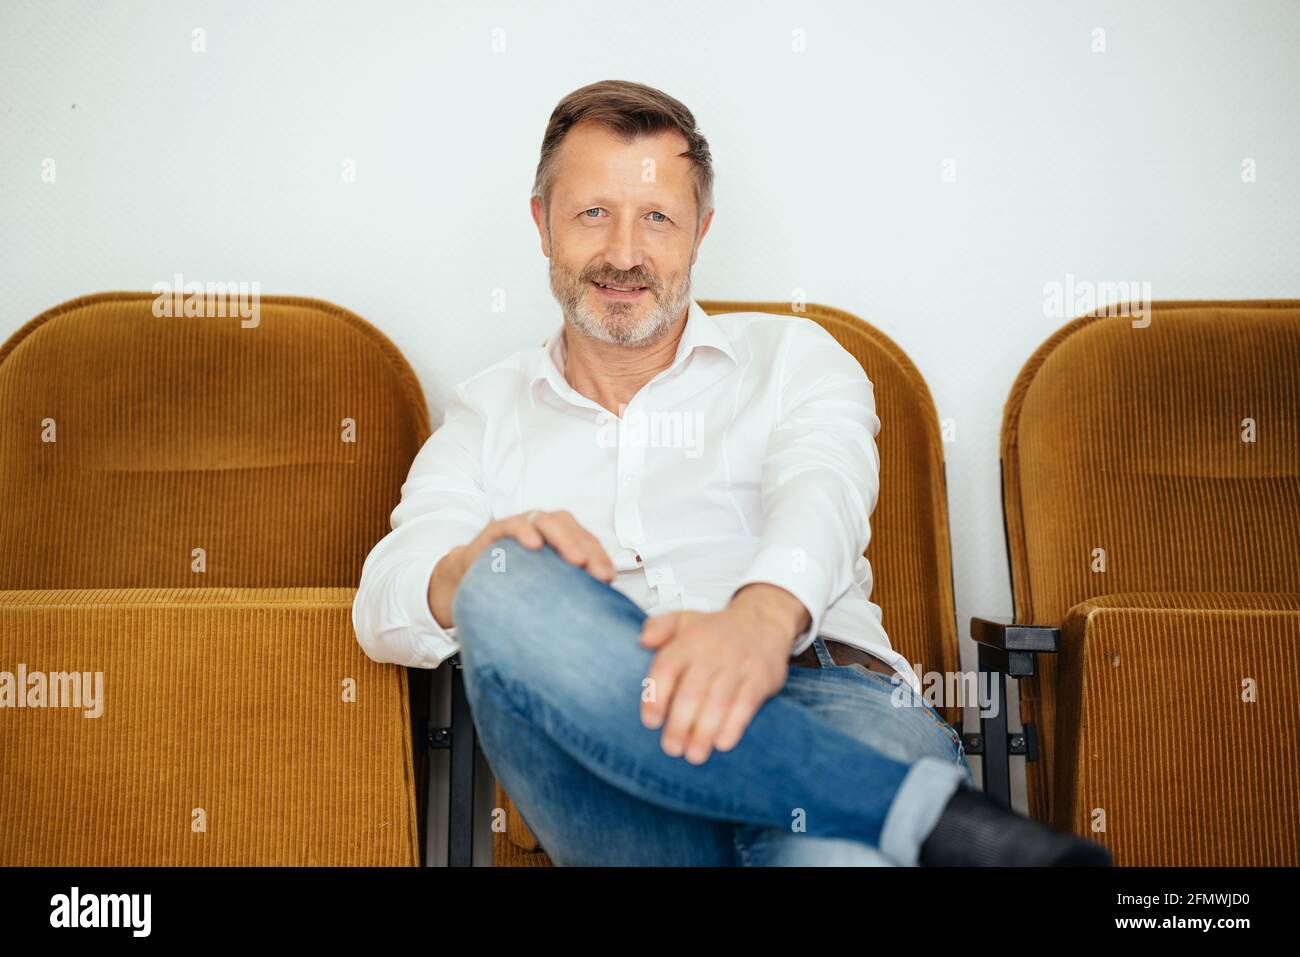 Relaxed confident middle-aged man smiling quietly t the camera as he sits in jeans and white shirt on a row of chairs against a wall with copyspace Stock Photo